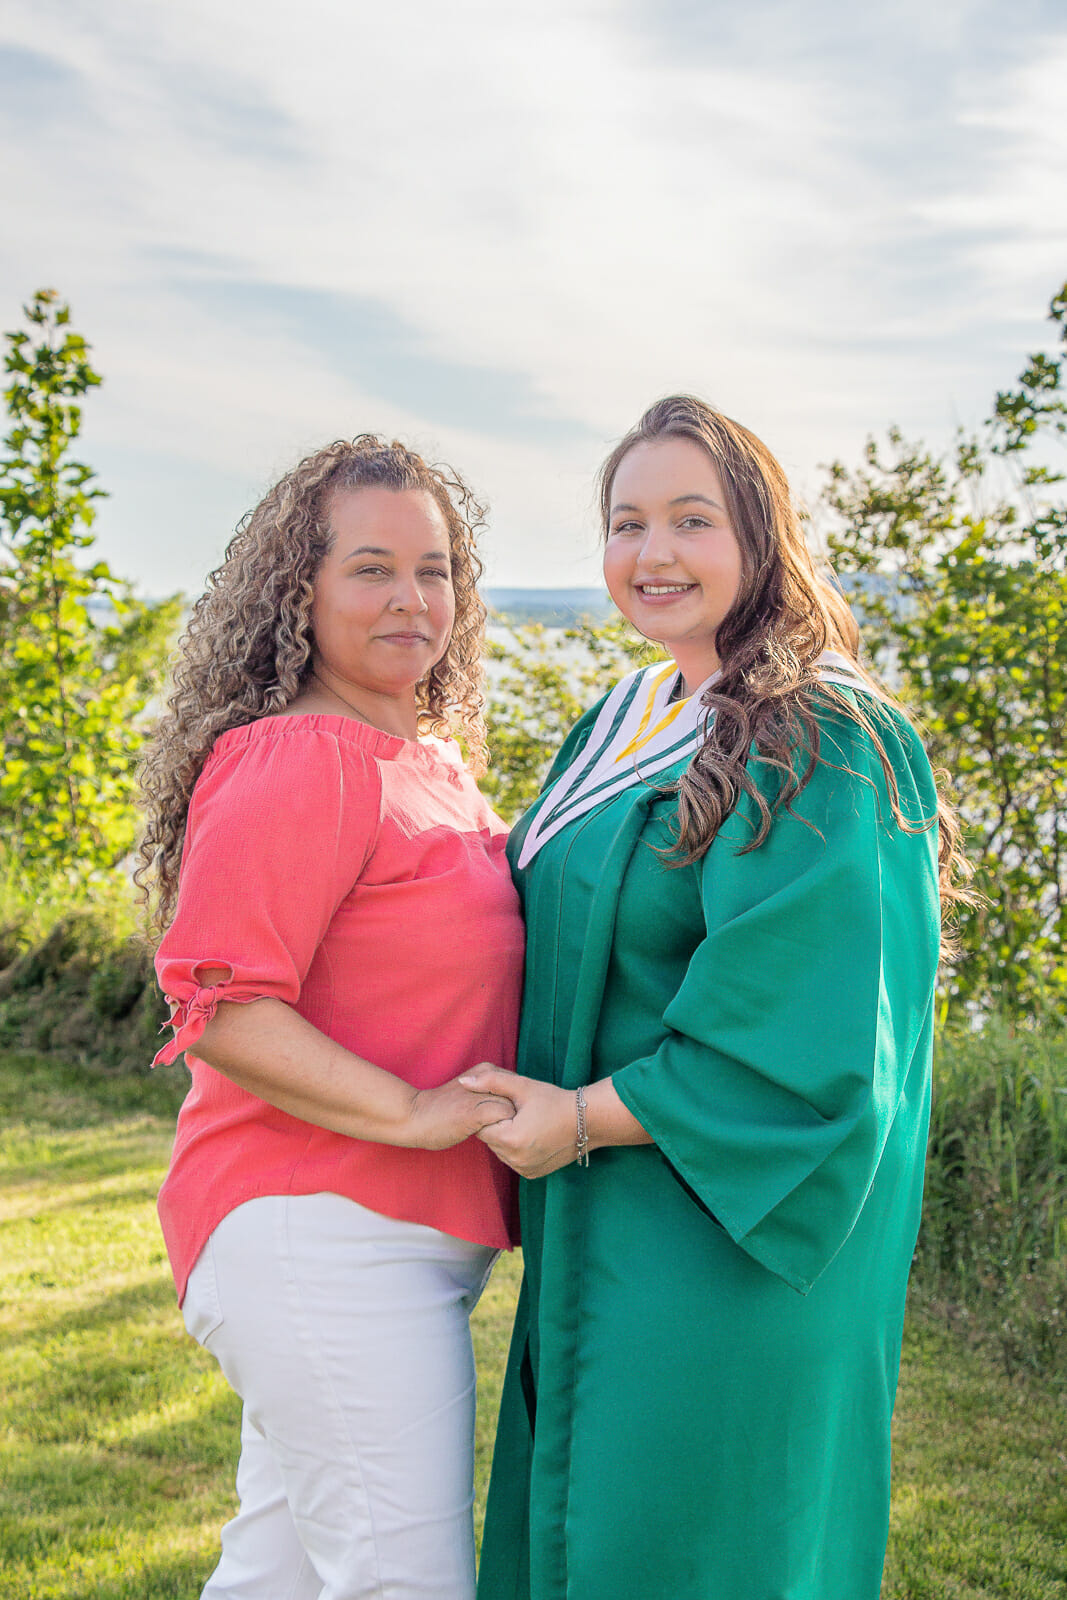 A photo from the Patterson Graduation Photoshoot, shot in Annapolis Royal, Nova Scotia at the Fort Anne on a beautiful sunny day